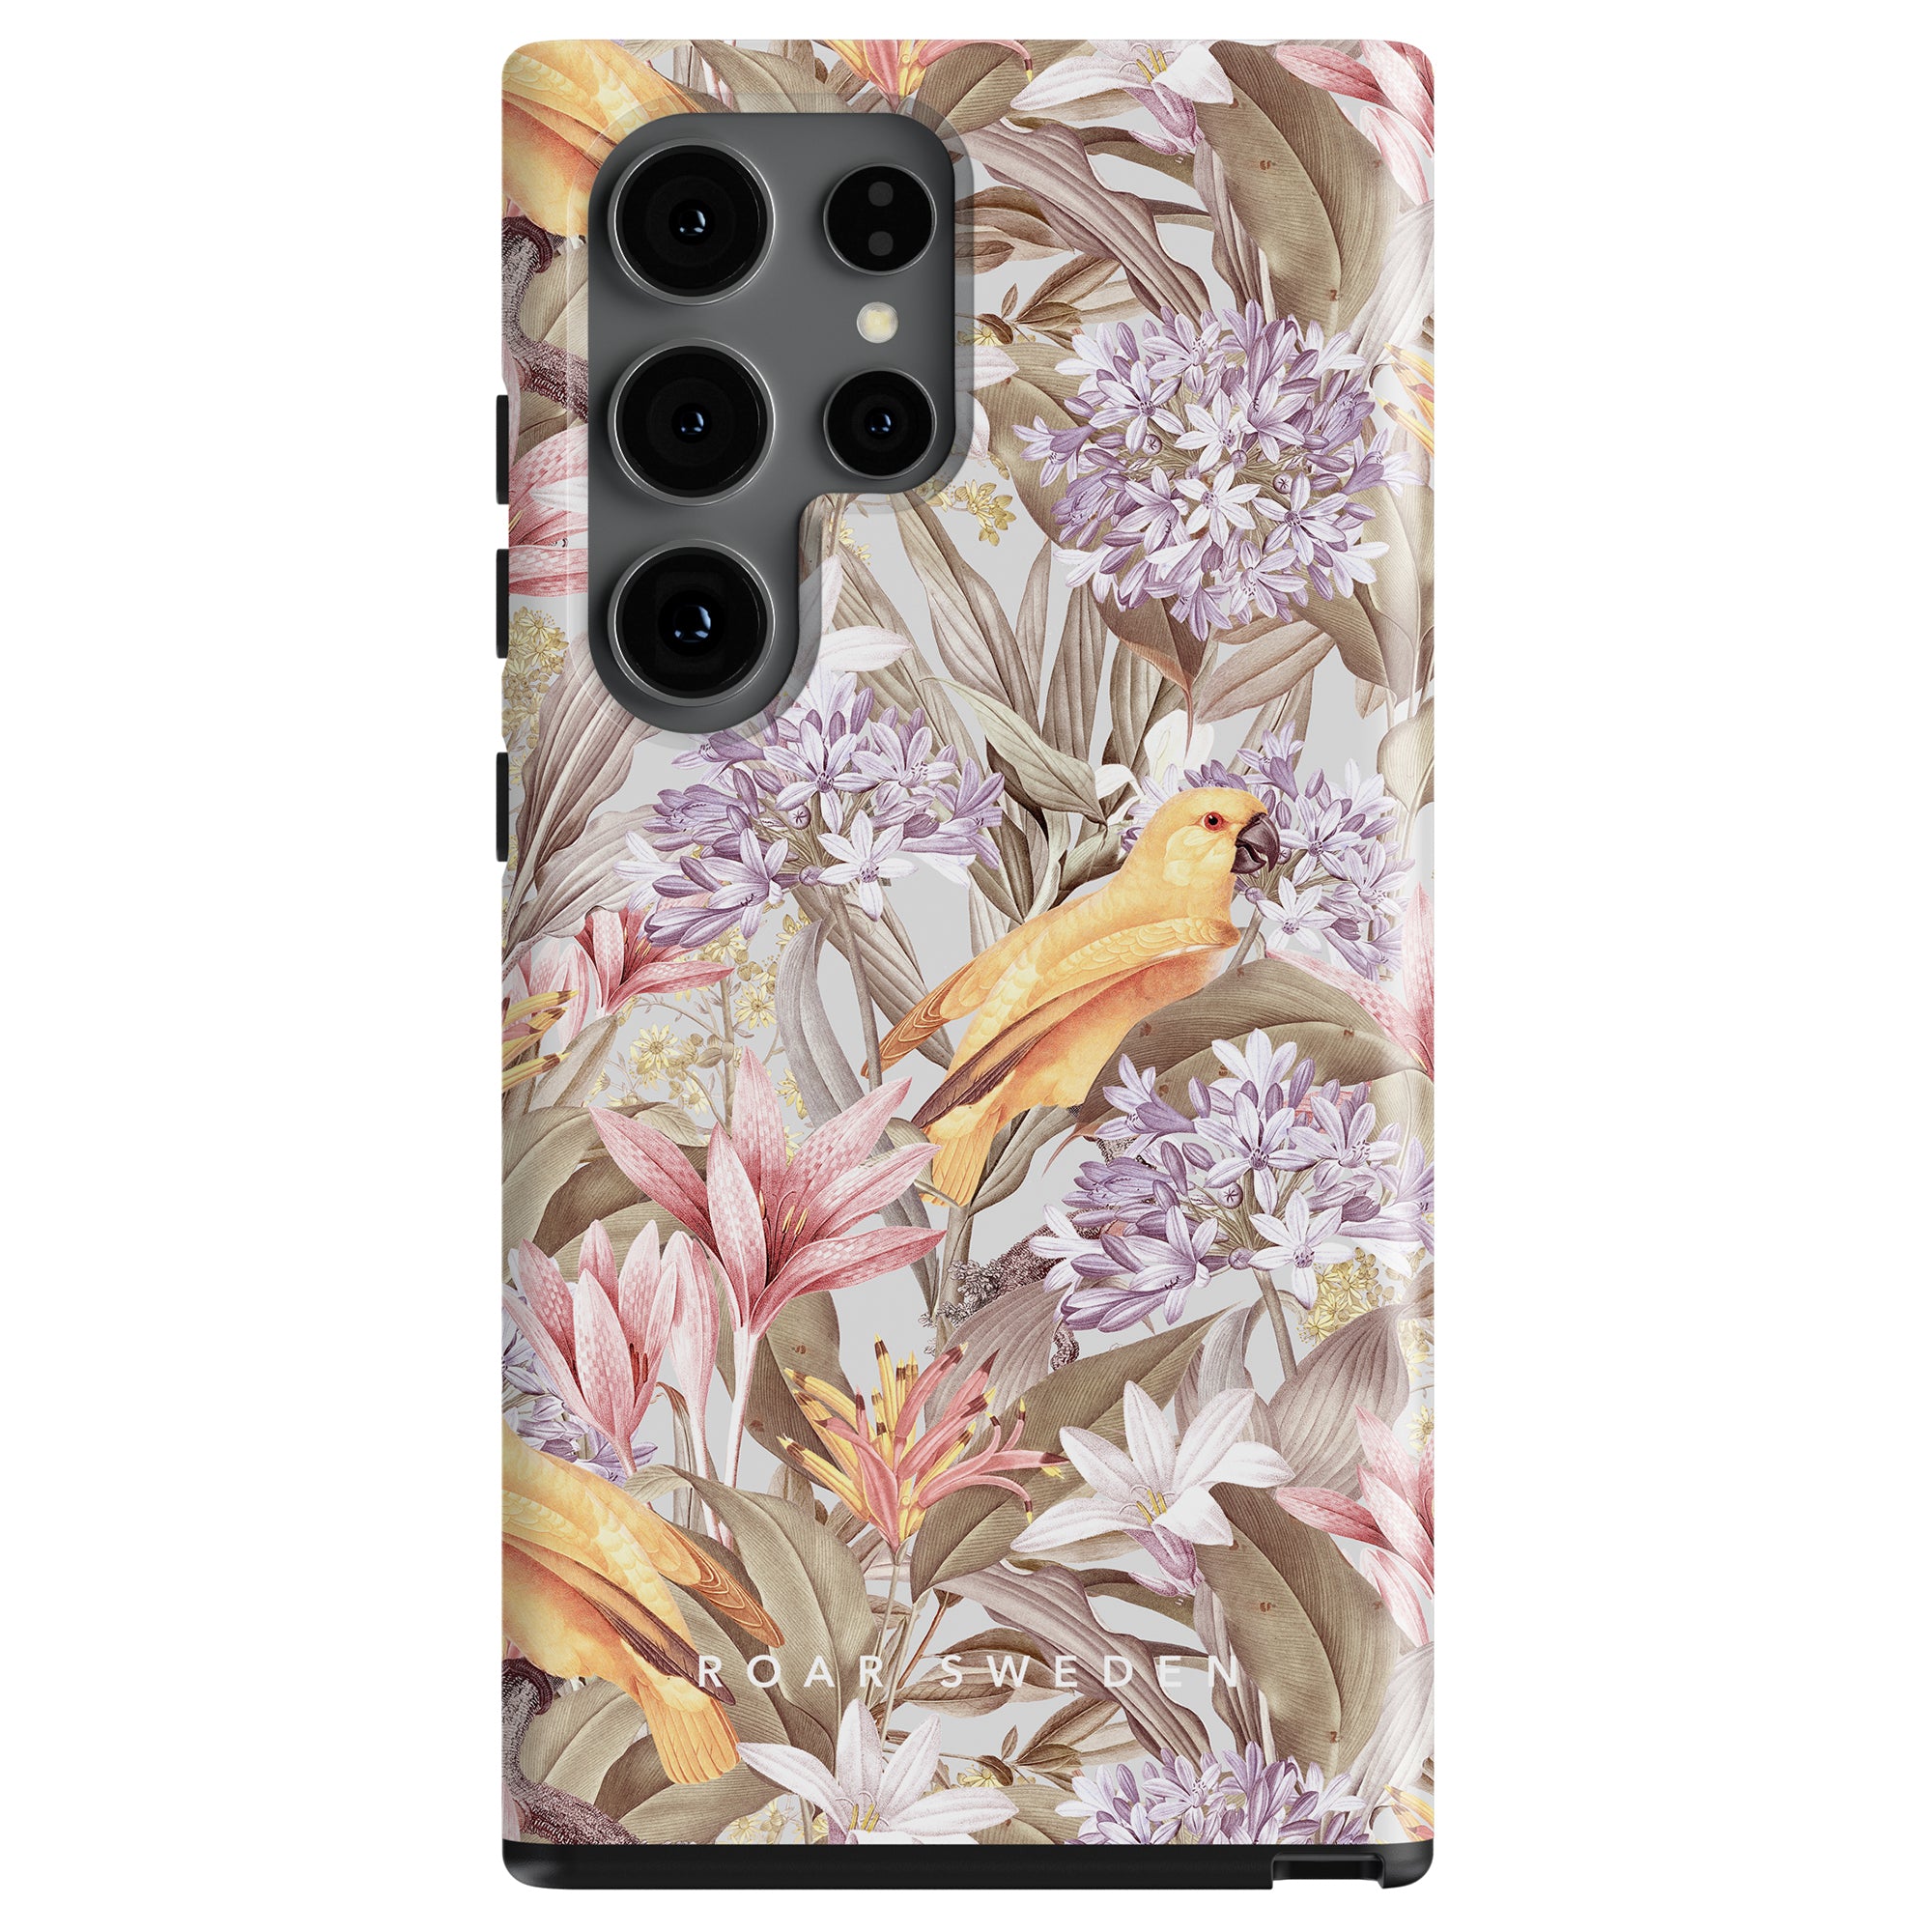 Floral Mango Parrot - Tough Case design featuring birds and exotic plants with cutouts for camera lenses, part of the summer collection.